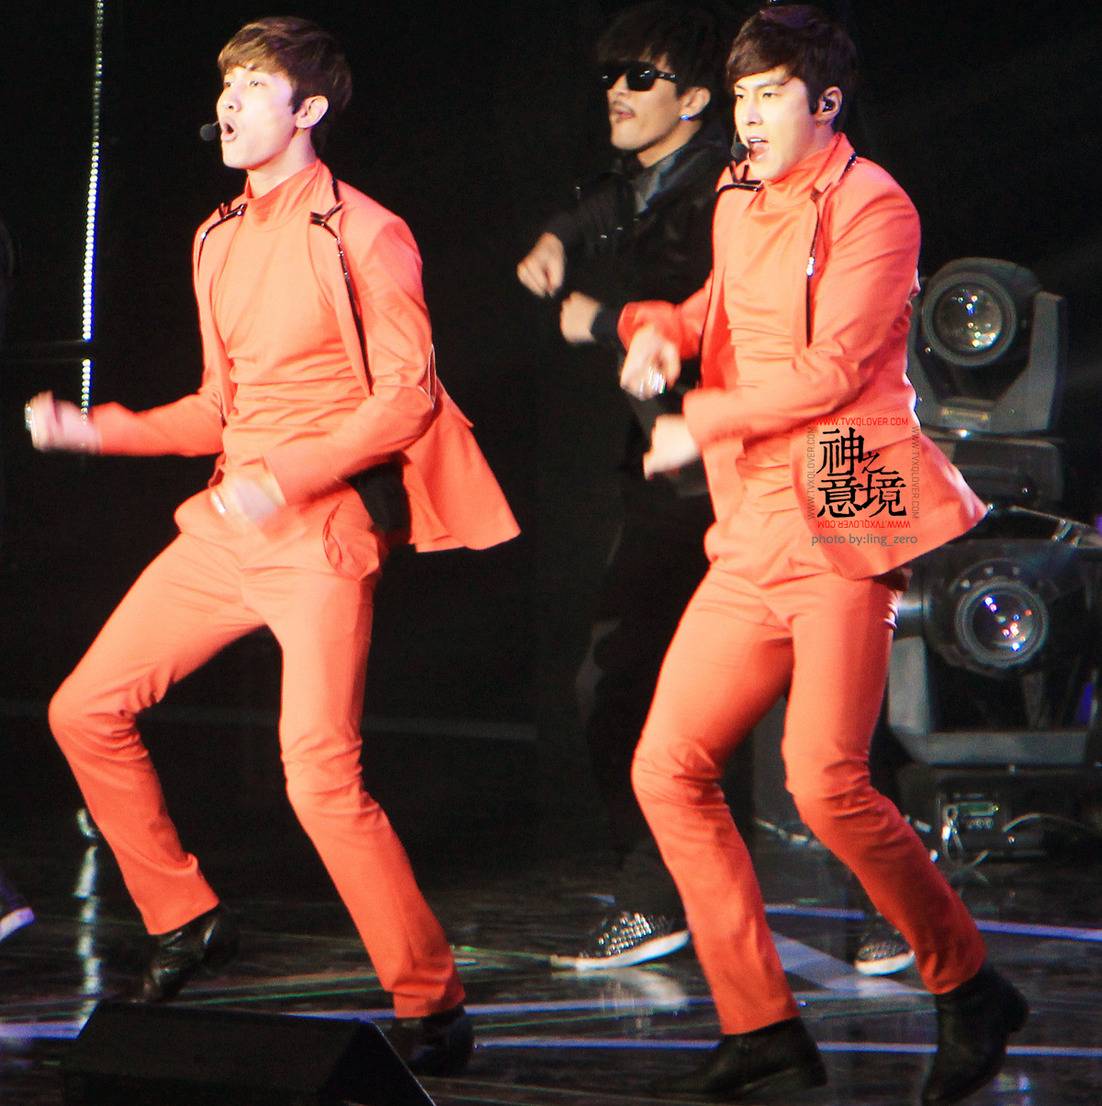 [22.12.12][Pics] TVXQ - Sichuan TV New Year's Eve Concert 6-7